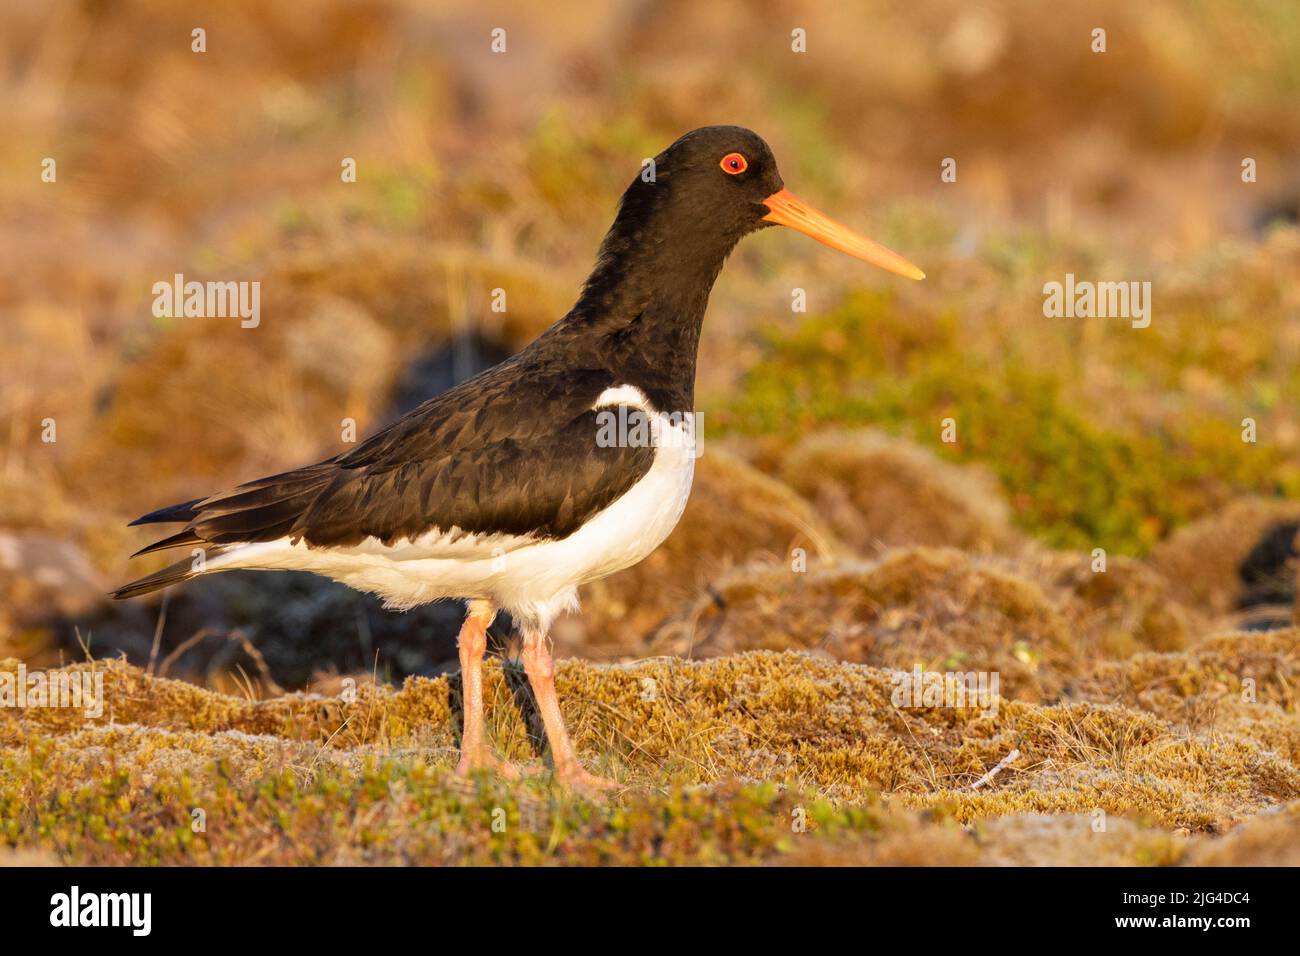 Eurasian Oystercatcher (Haematopus ostralegus), side view of an adult standing on the ground, Southern Region, Iceland Stock Photo